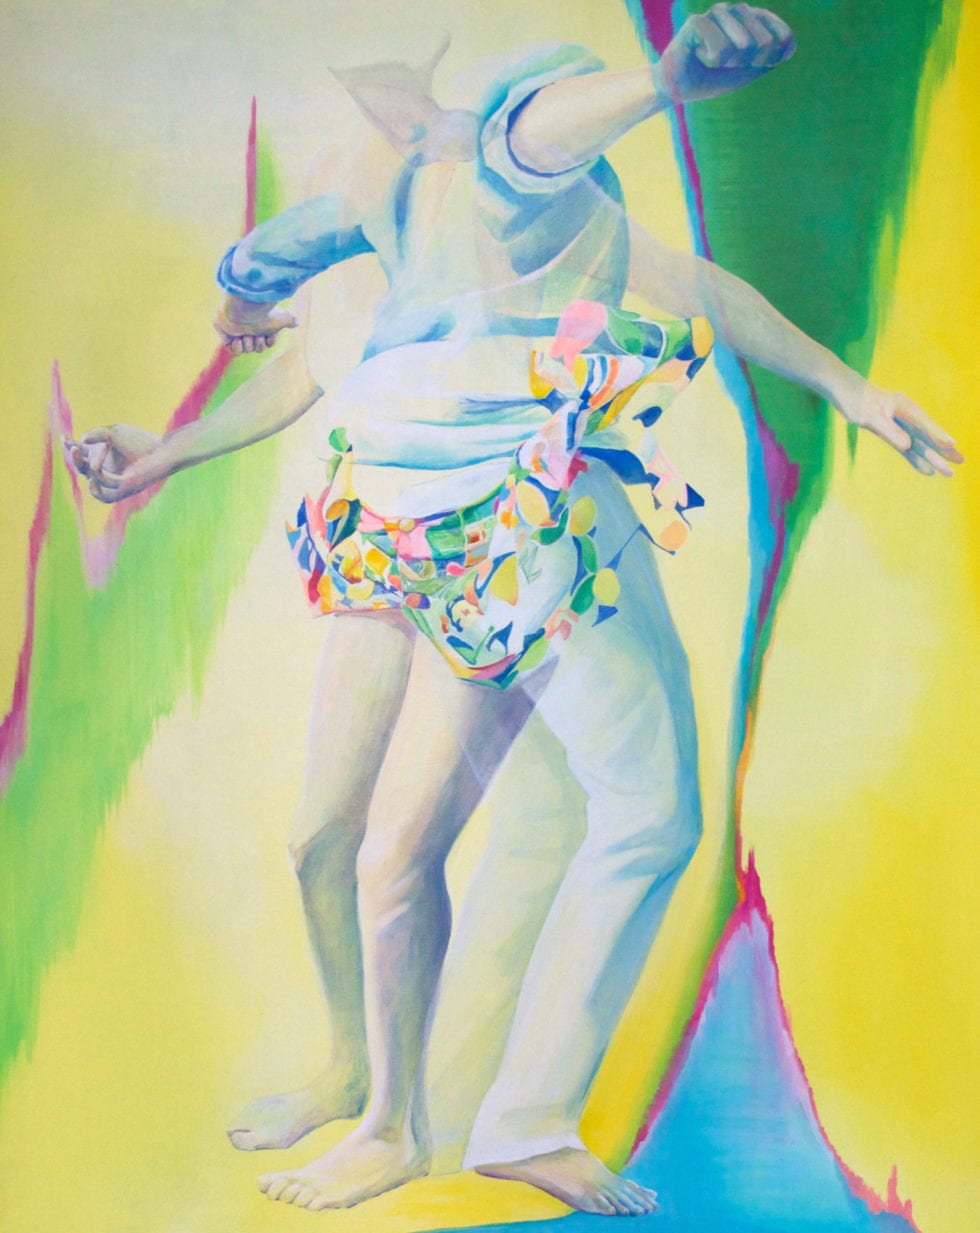 Marion Charlet, Ciao IV, 100x80cm, 2020